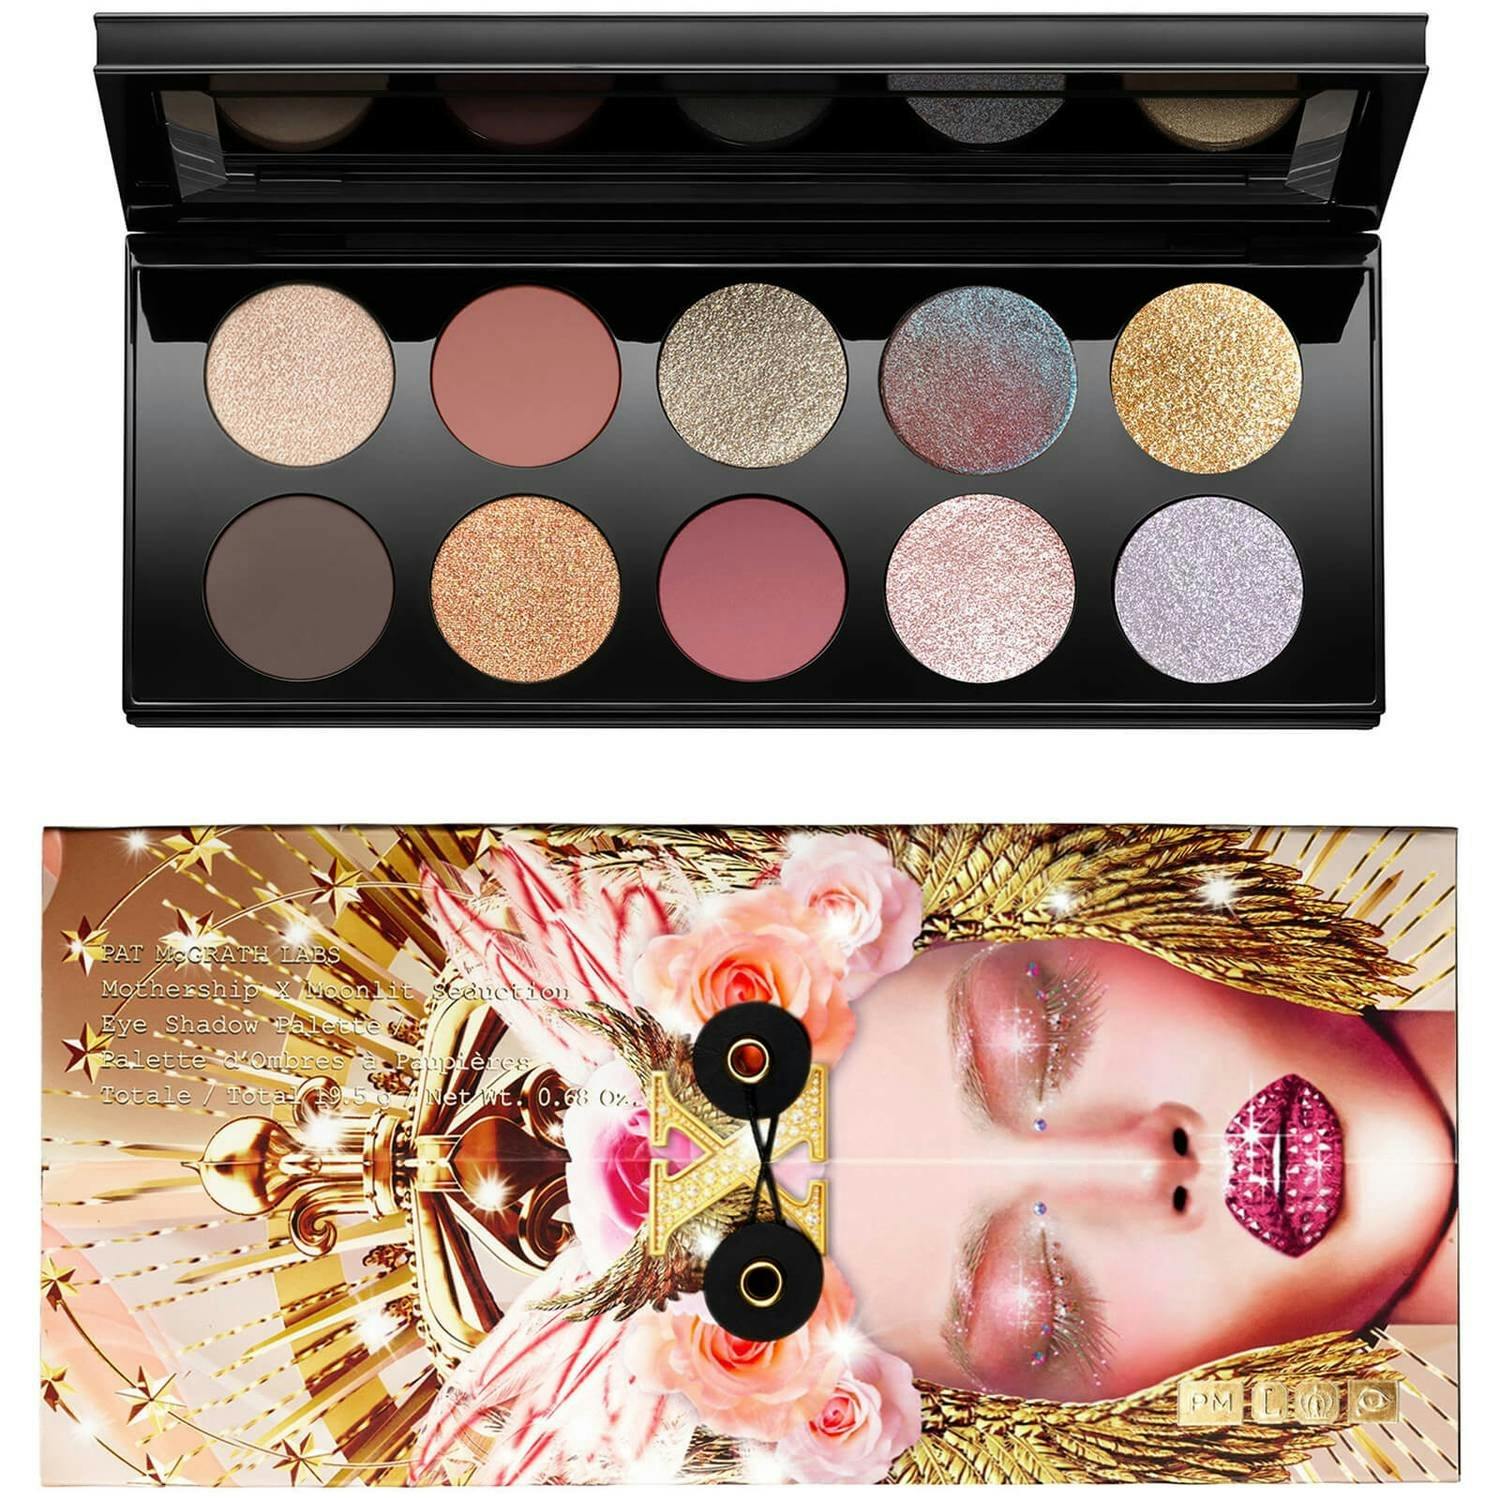  Pat McGrath Labs Eyeshadow Palette Review - TESTING BEAUTY - EPISODE 15